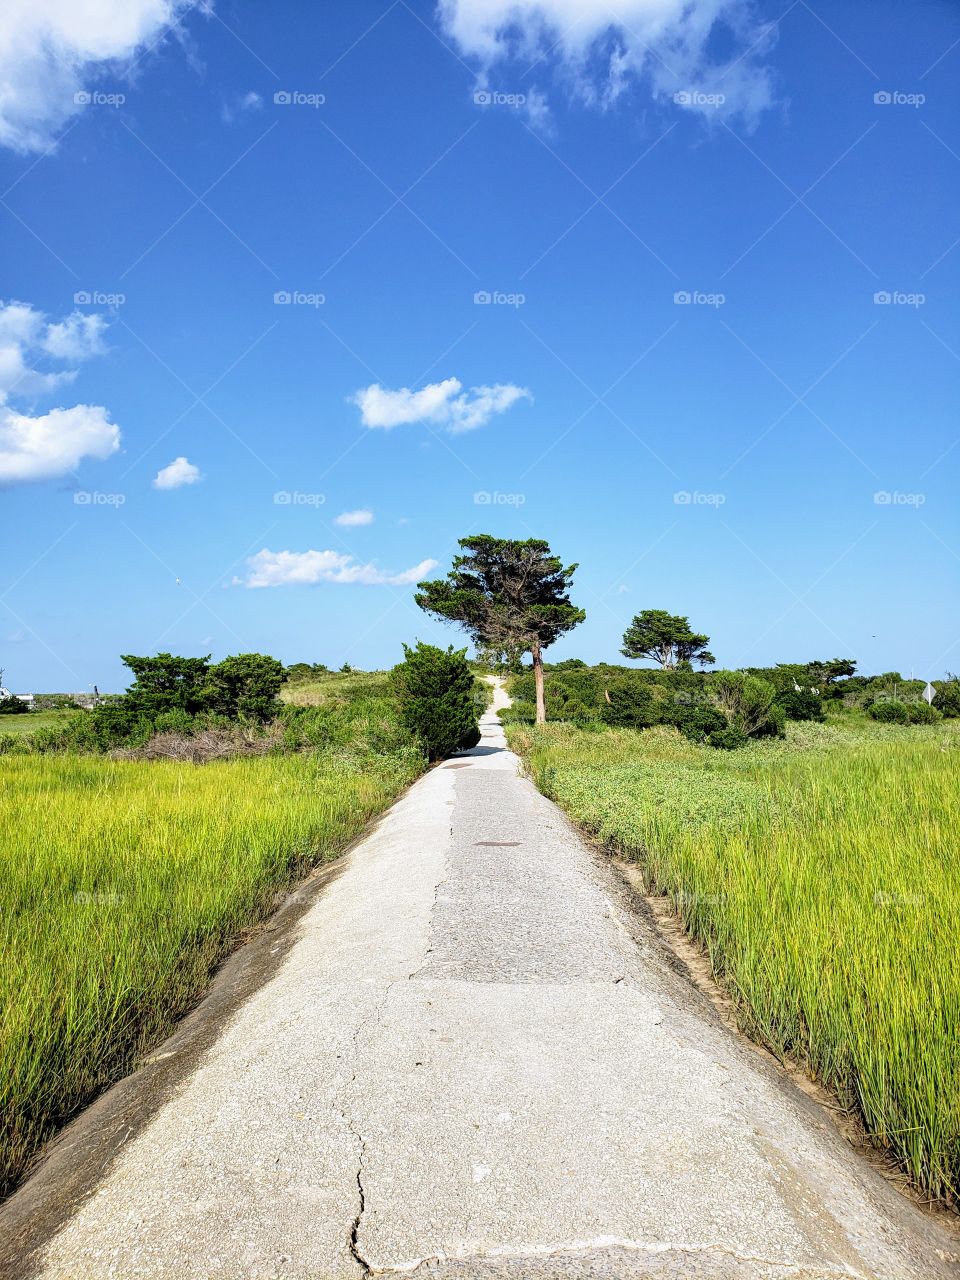 Straight on shot up a path that eventually leads to the ocean, with beautiful tall grass on either side and a nice looking tree slightly right of the path. The picture is meant to slowly draw your attention up the path to the tree.